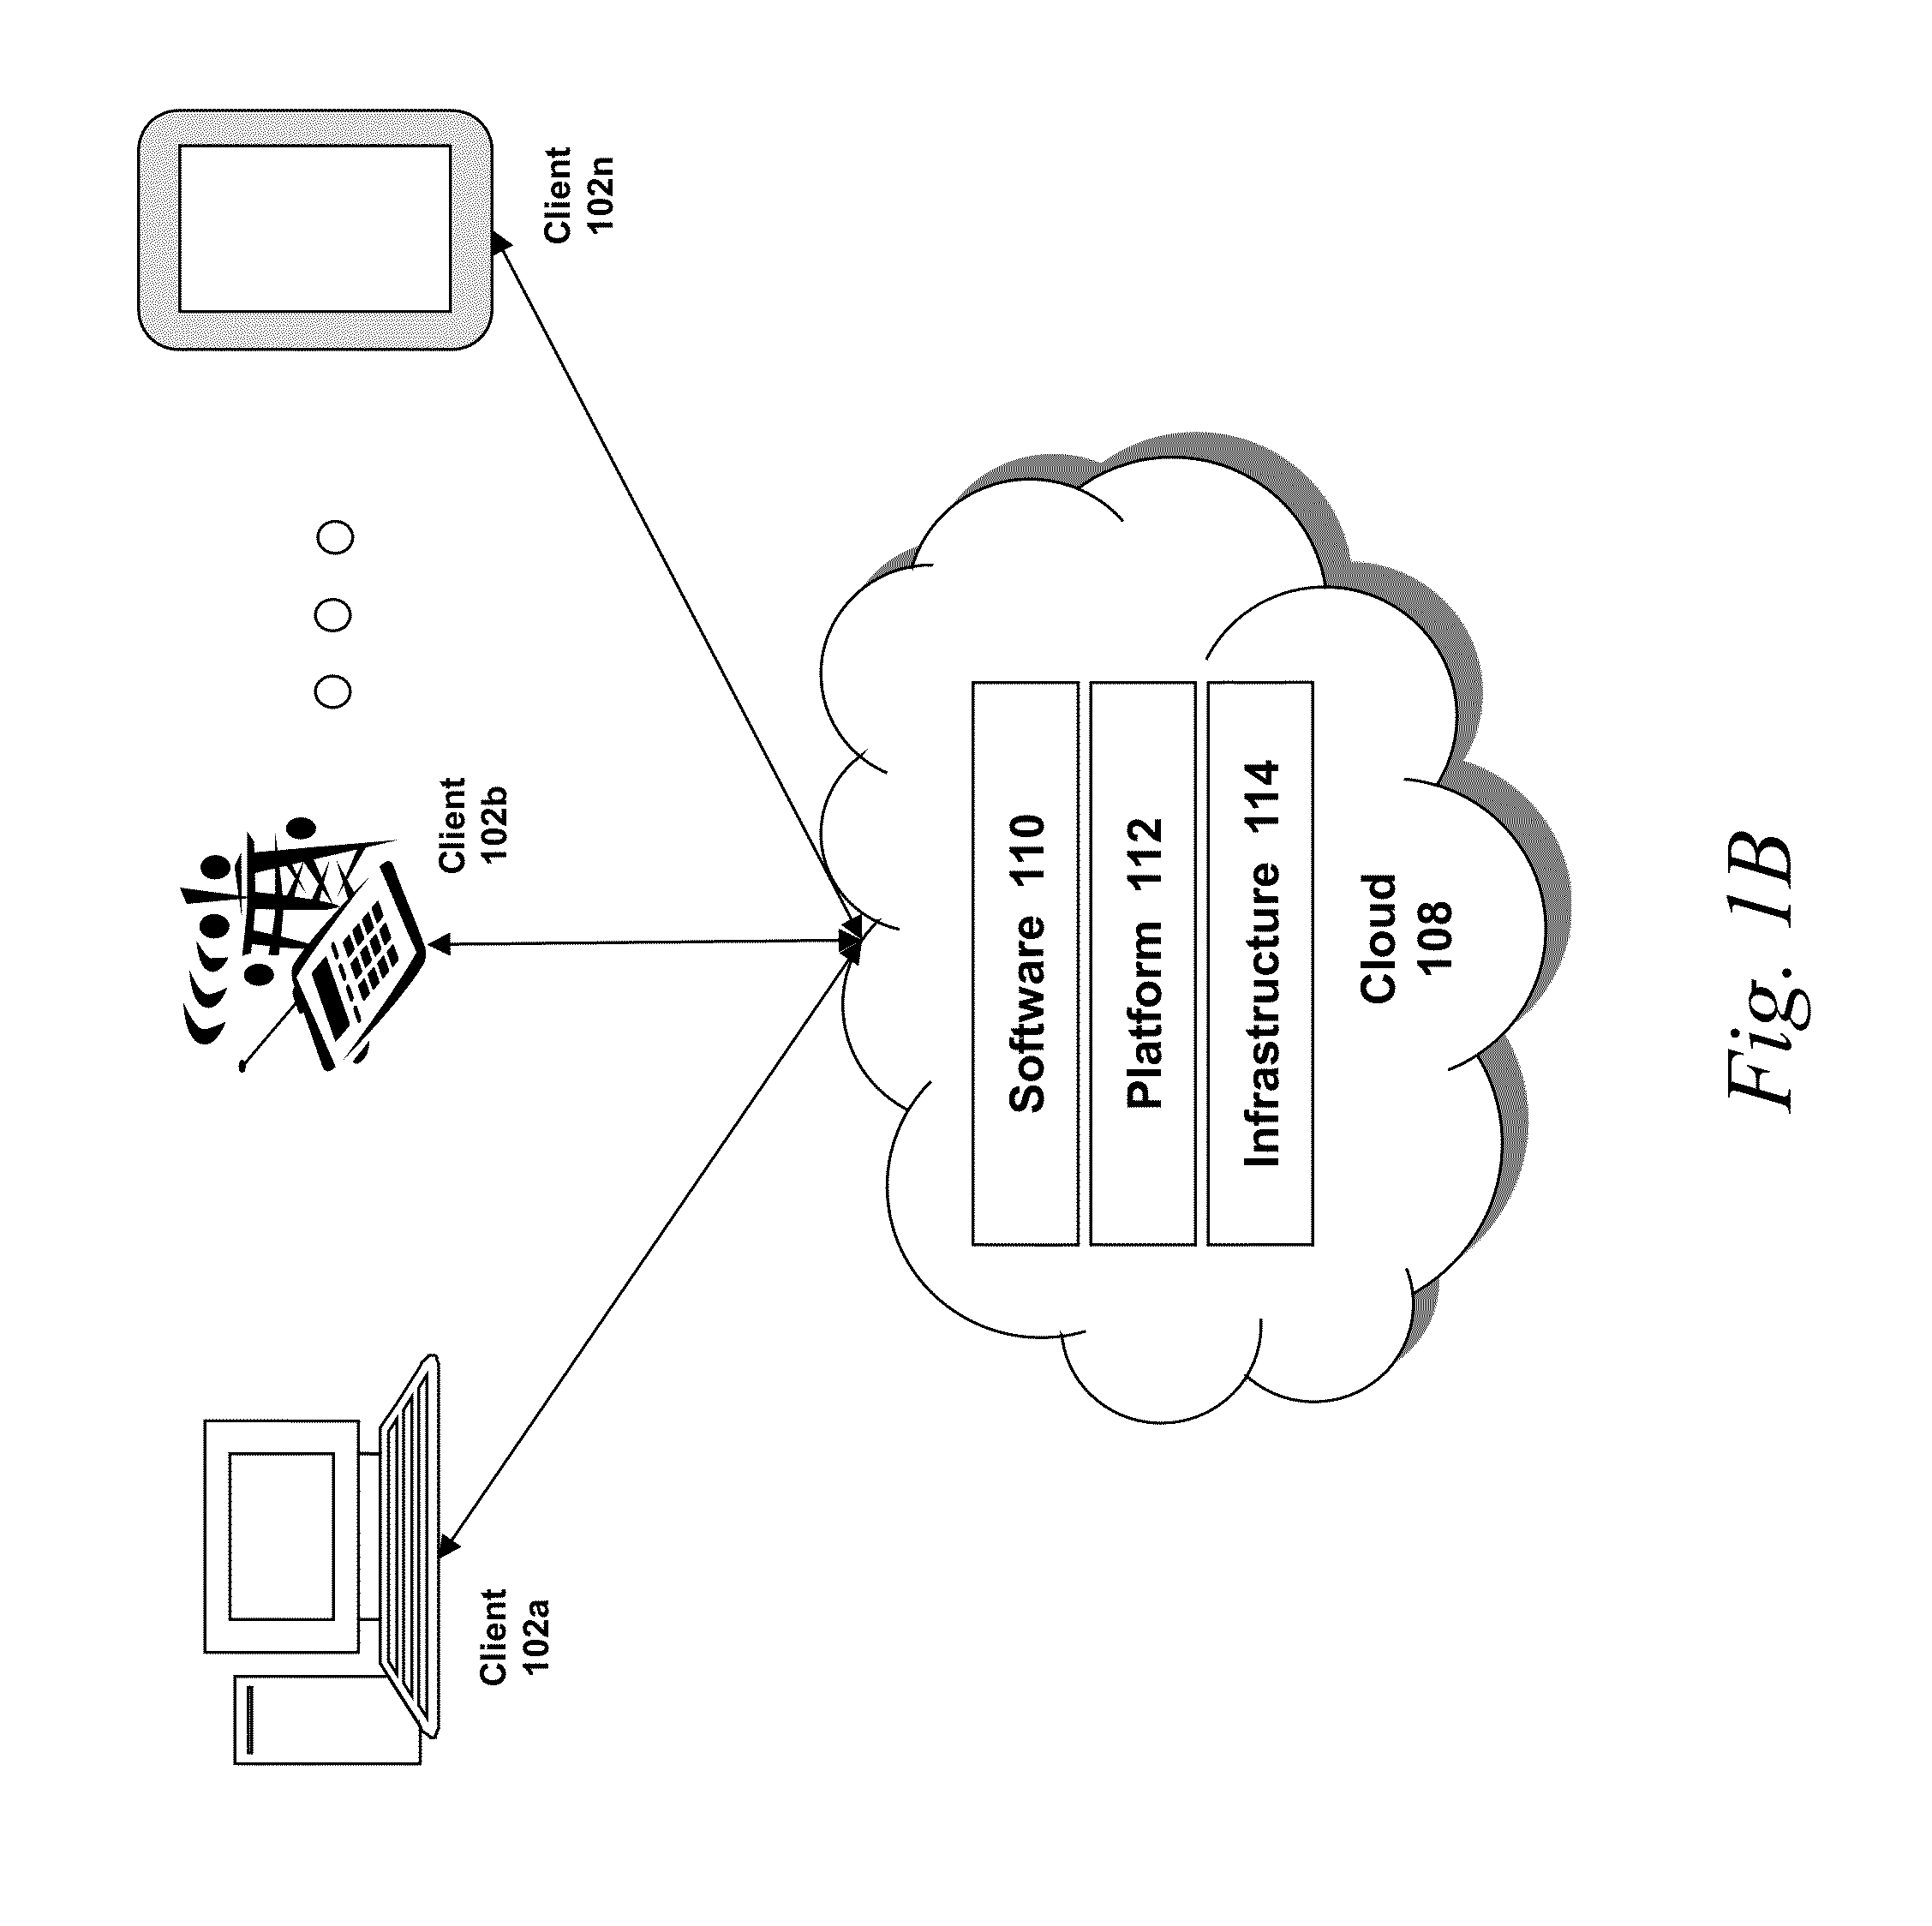 Systems and methods of applying high performance computational techniques to analysis and execution of financial strategies